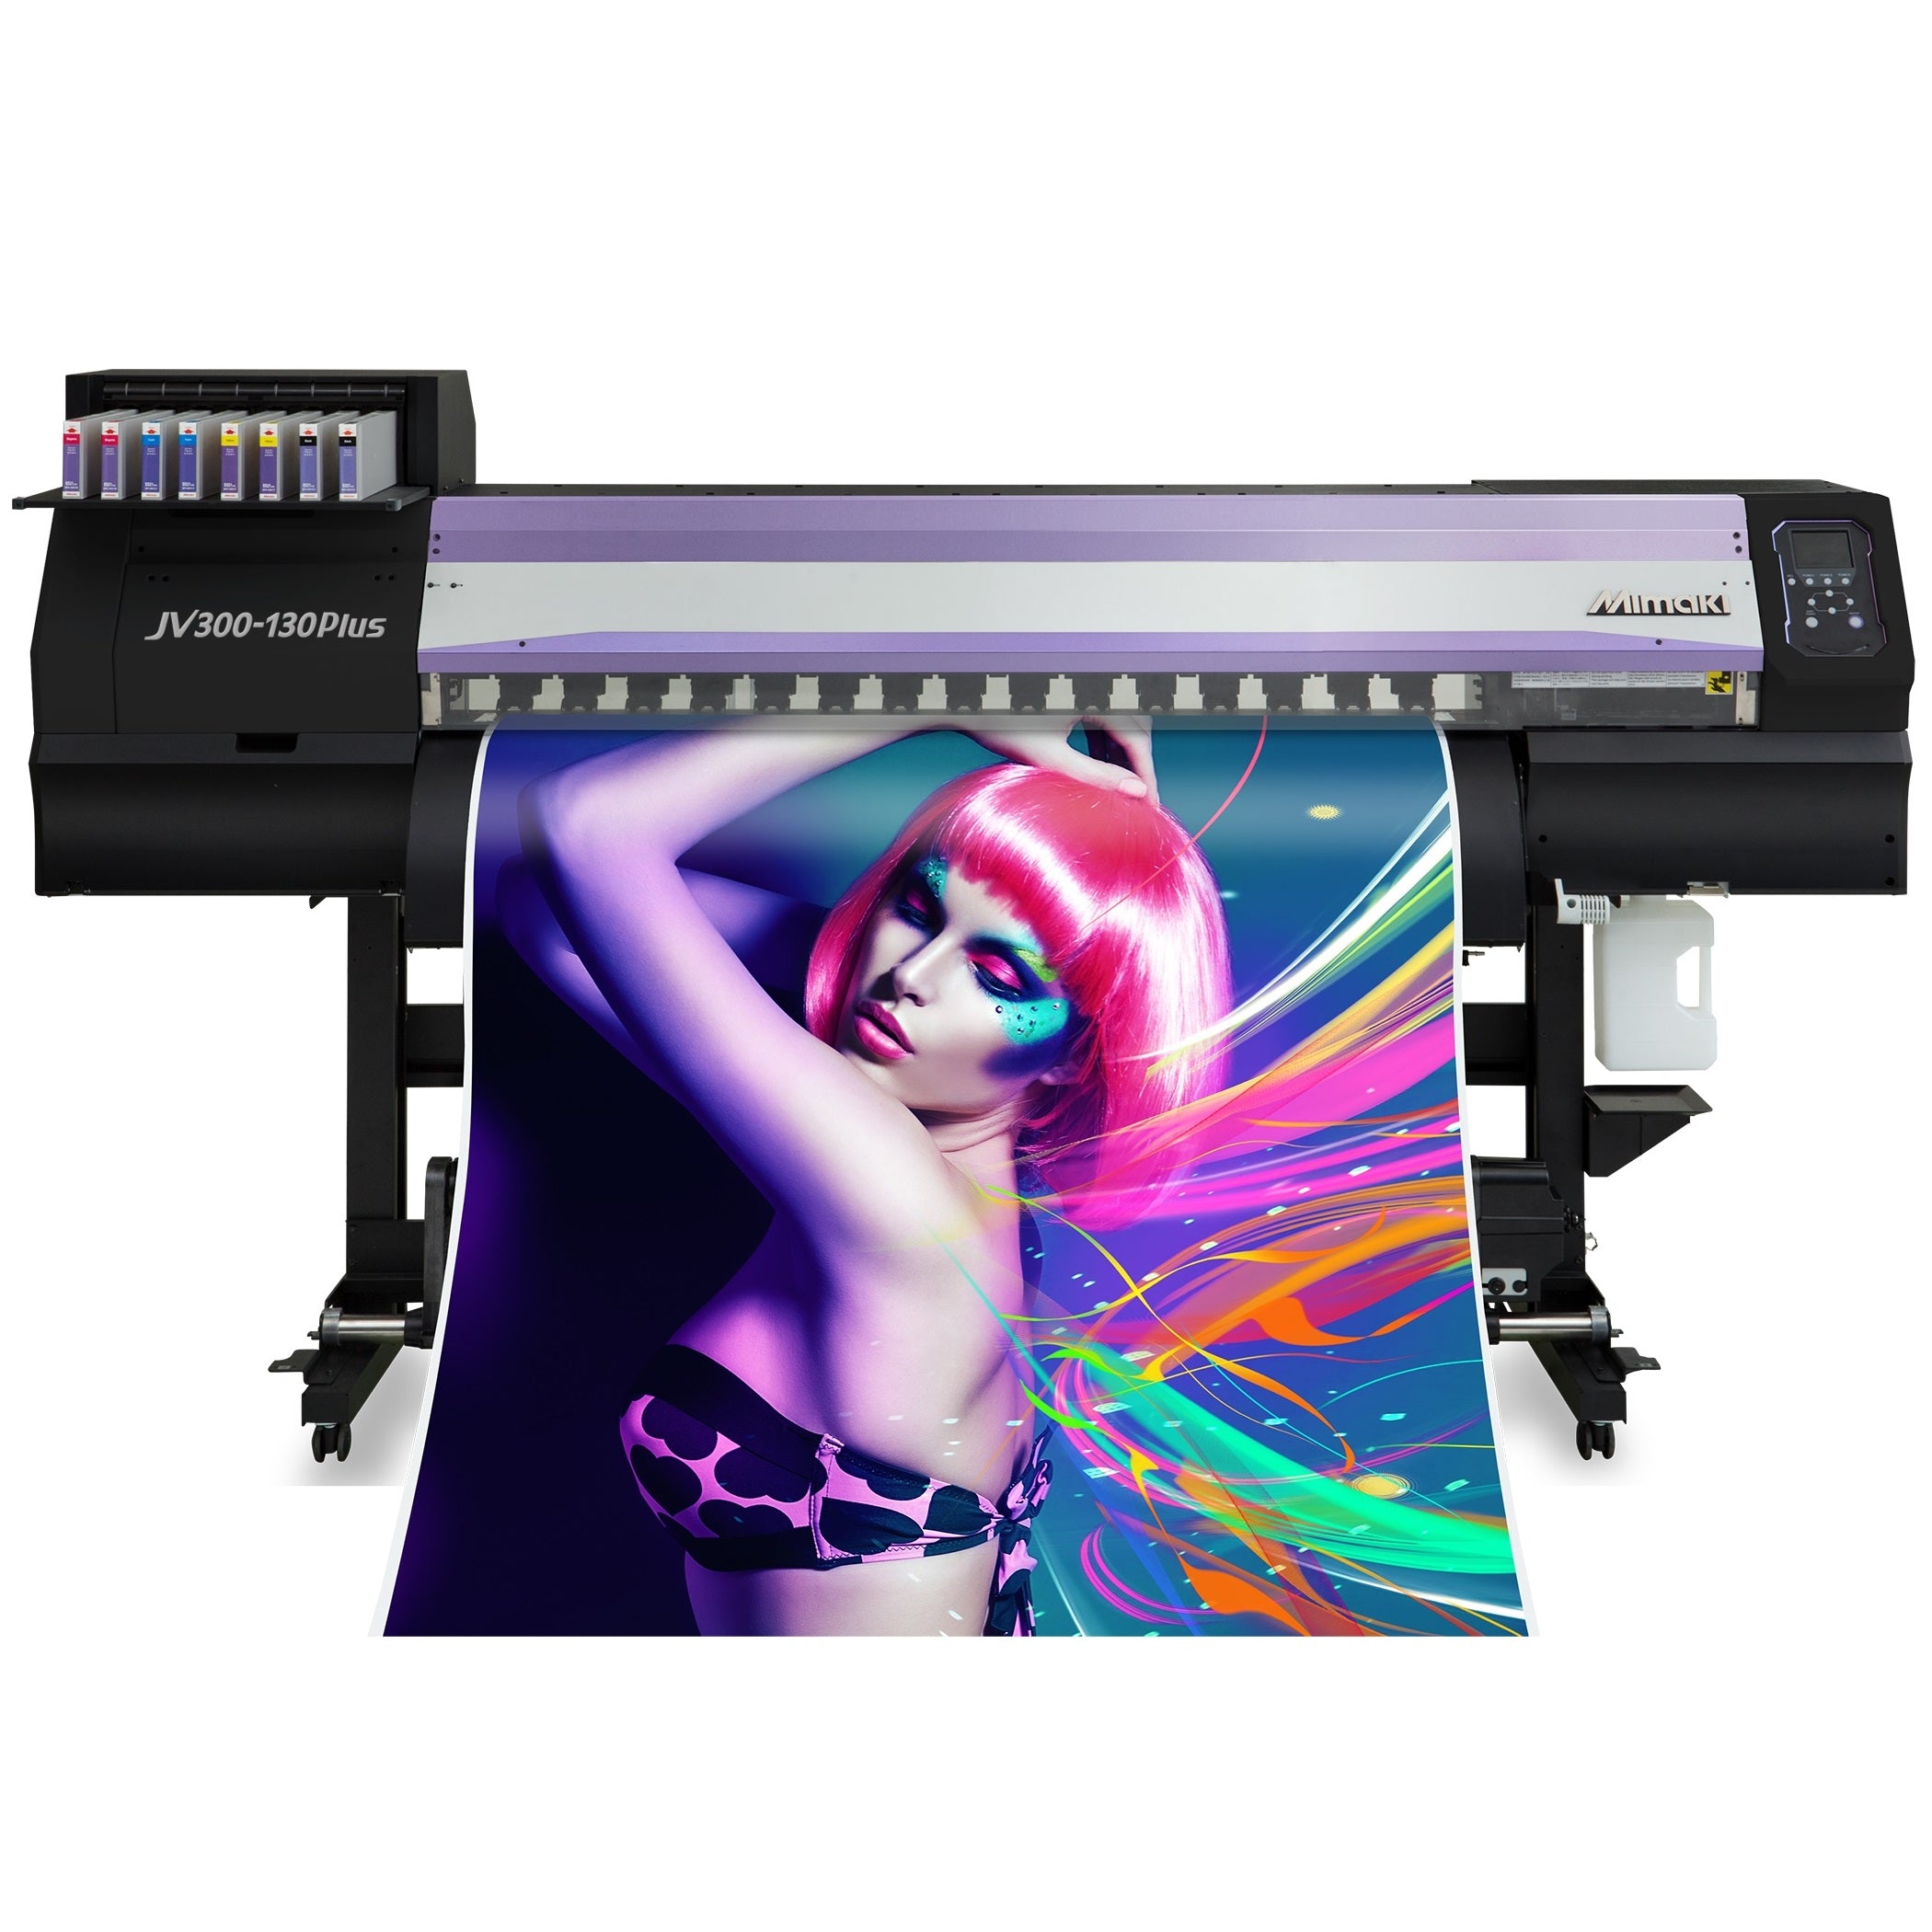 Absolute Toner Brand New Mimaki JV300-130 Plus 54" Inch Eco-Solvent Print/Cut Cutter Printer With Mimaki Advanced Pass System 4 (MAPS4) Print and Cut Plotters